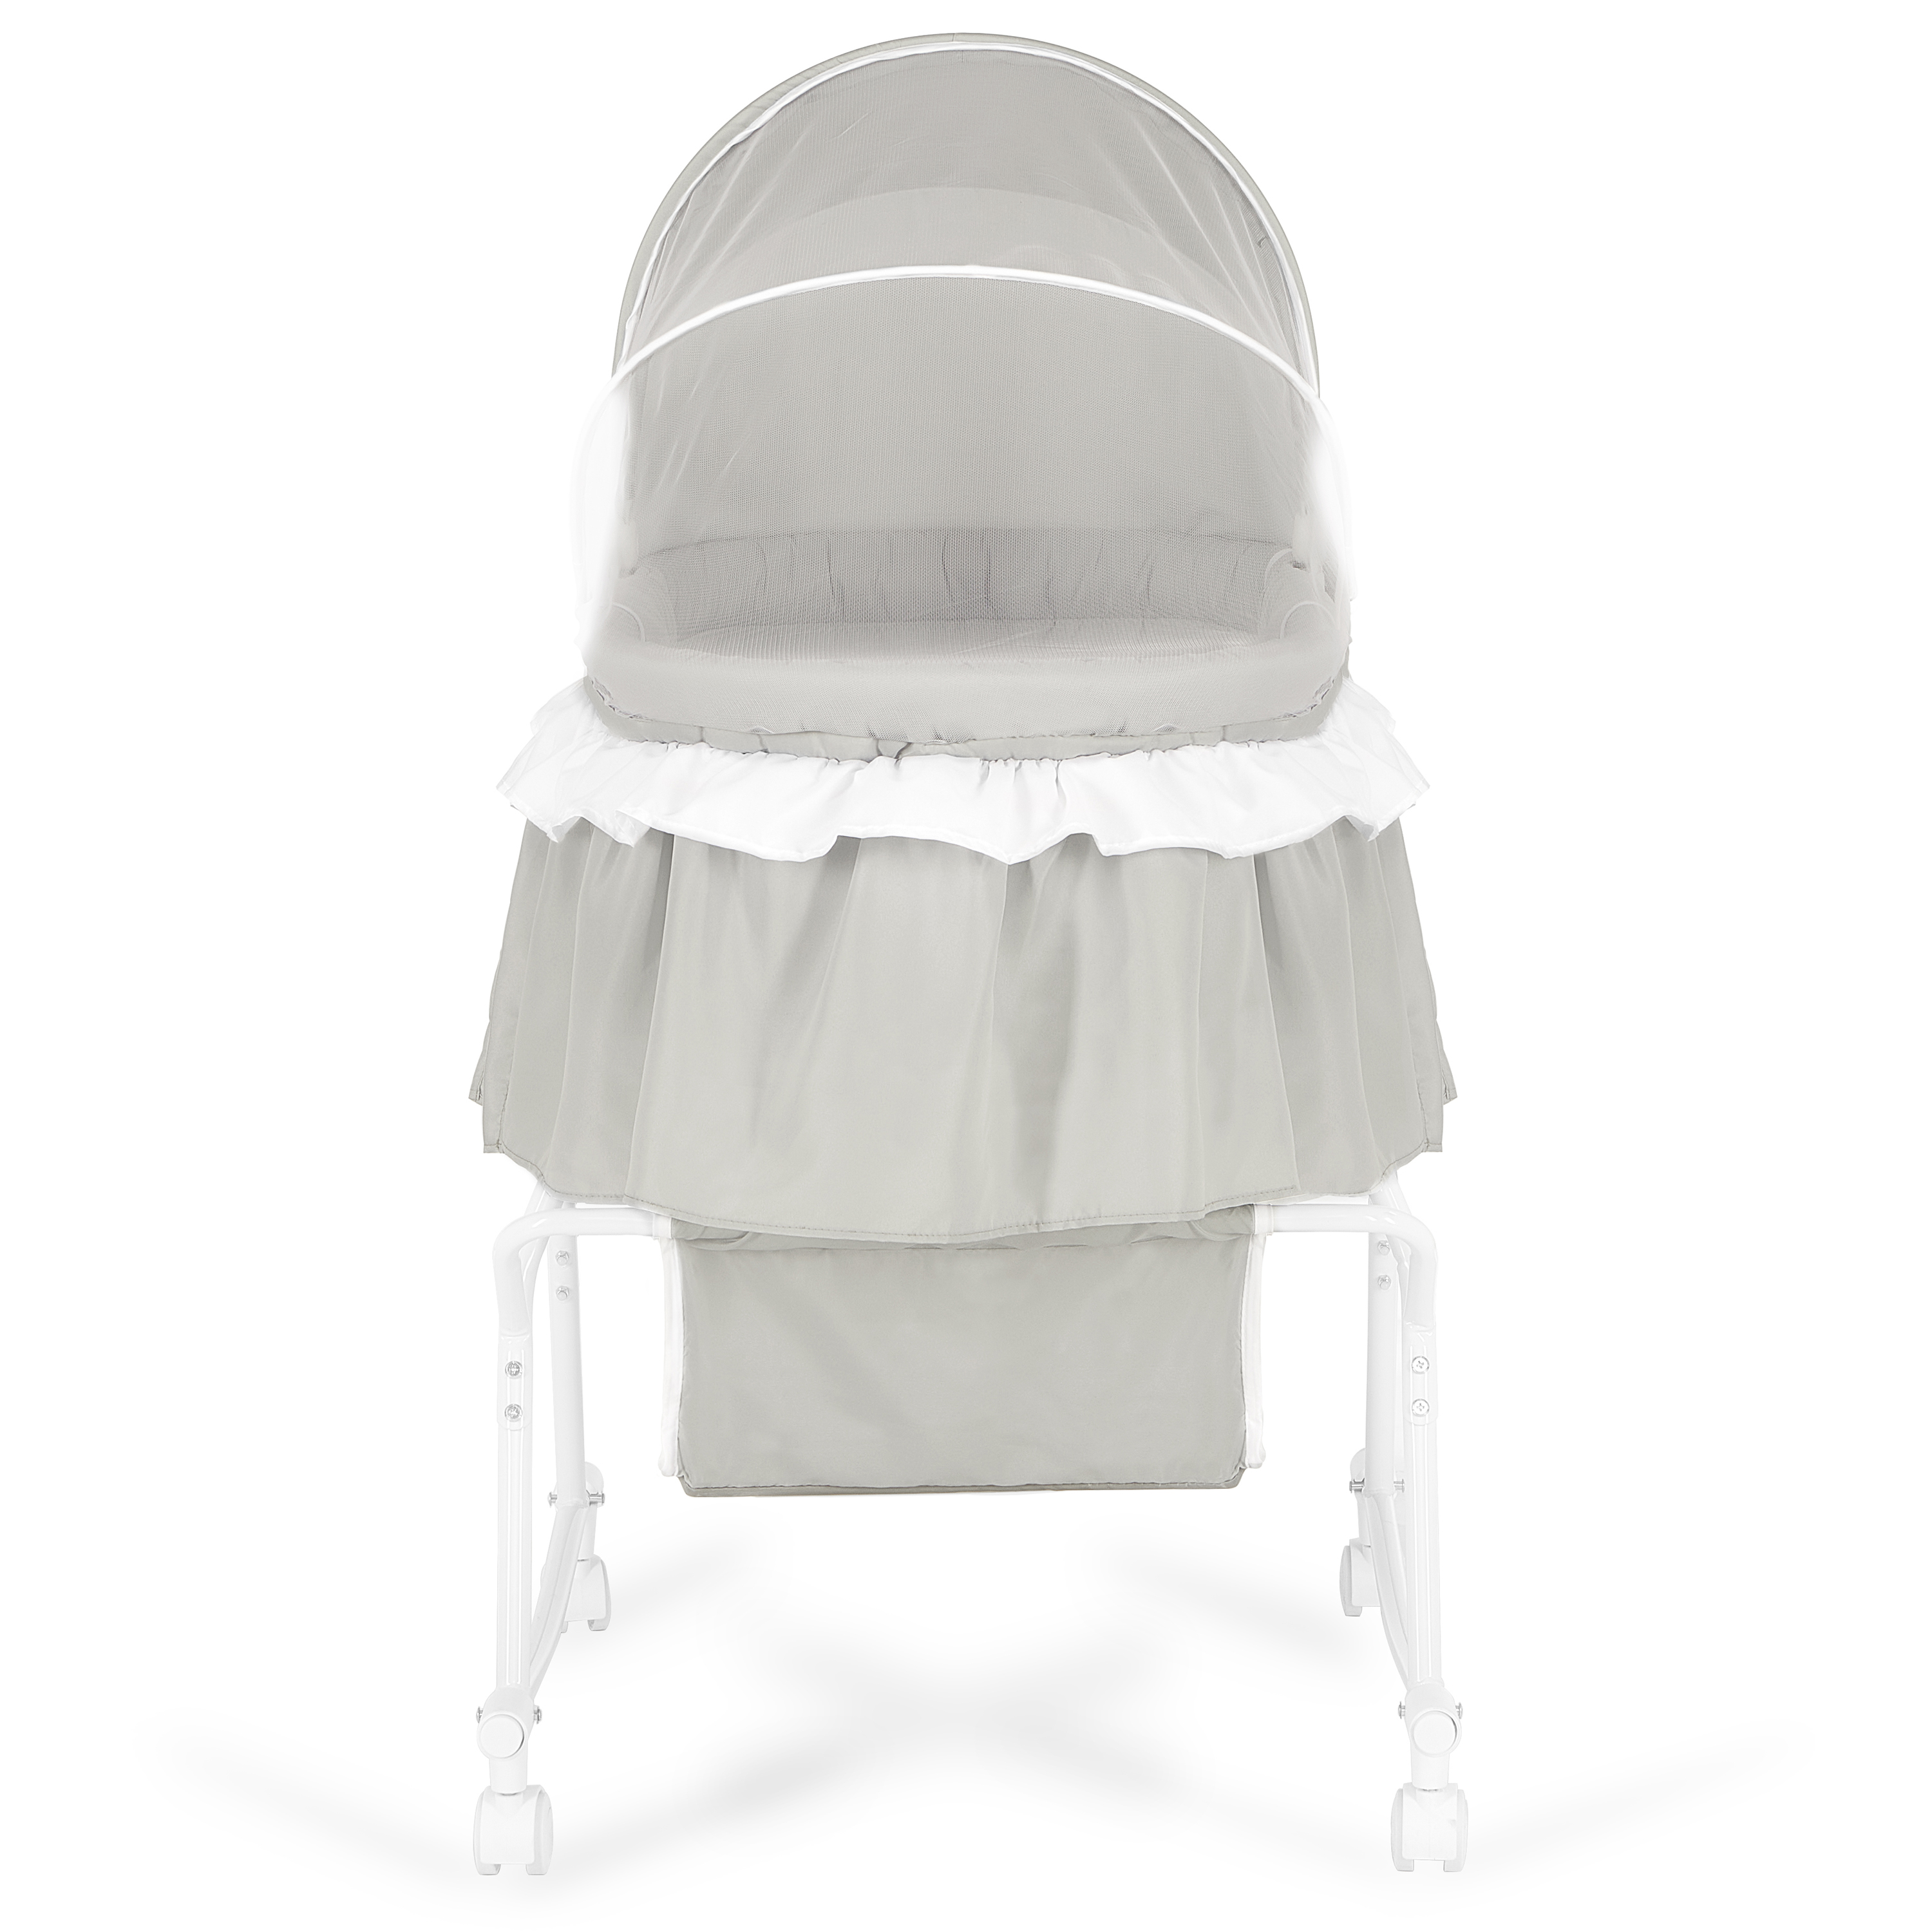 Dream On Me Lacy Portable 2-in-1 Bassinet & Cradle in Light Grey, Lightweight Baby Bassinet - image 4 of 26